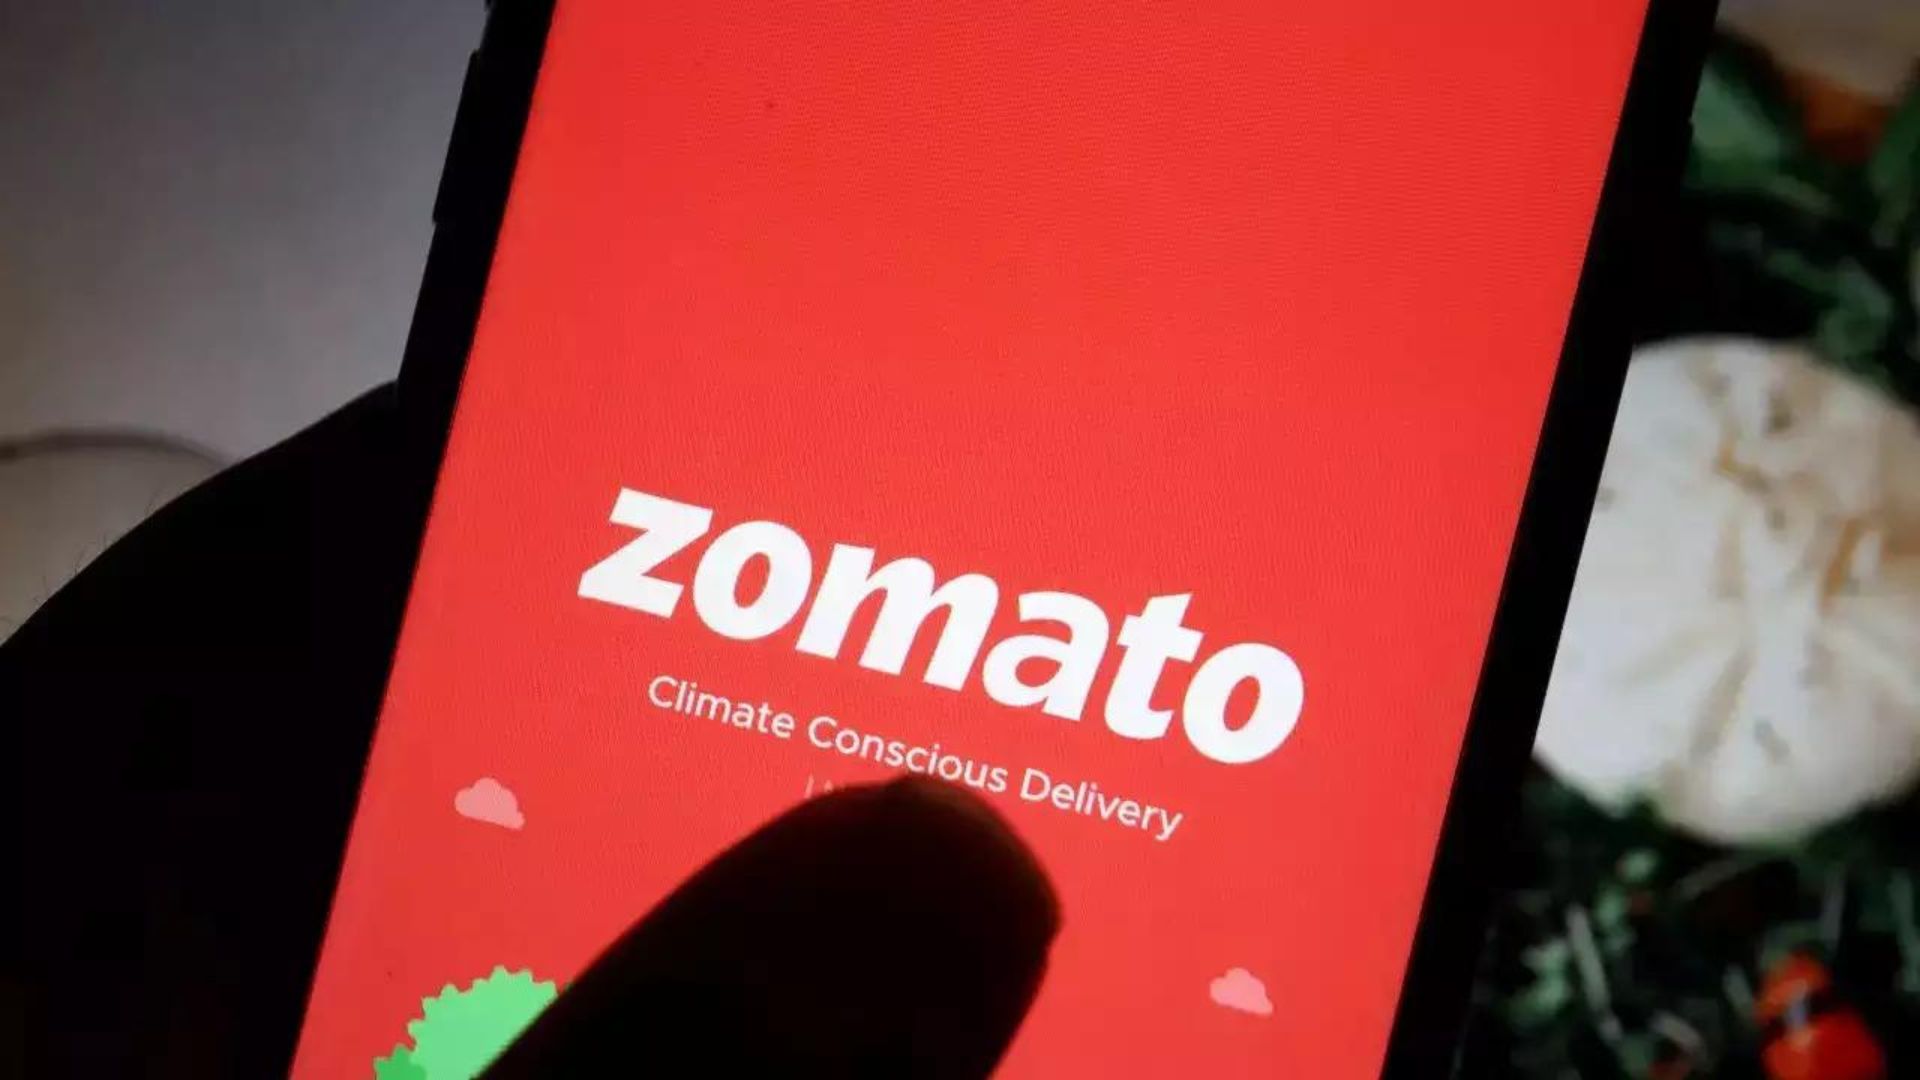 Bengaluru Man Criticizes Zomato Over ₹115 Delivery Fee, Equates It To Cost Of An Entire Dish